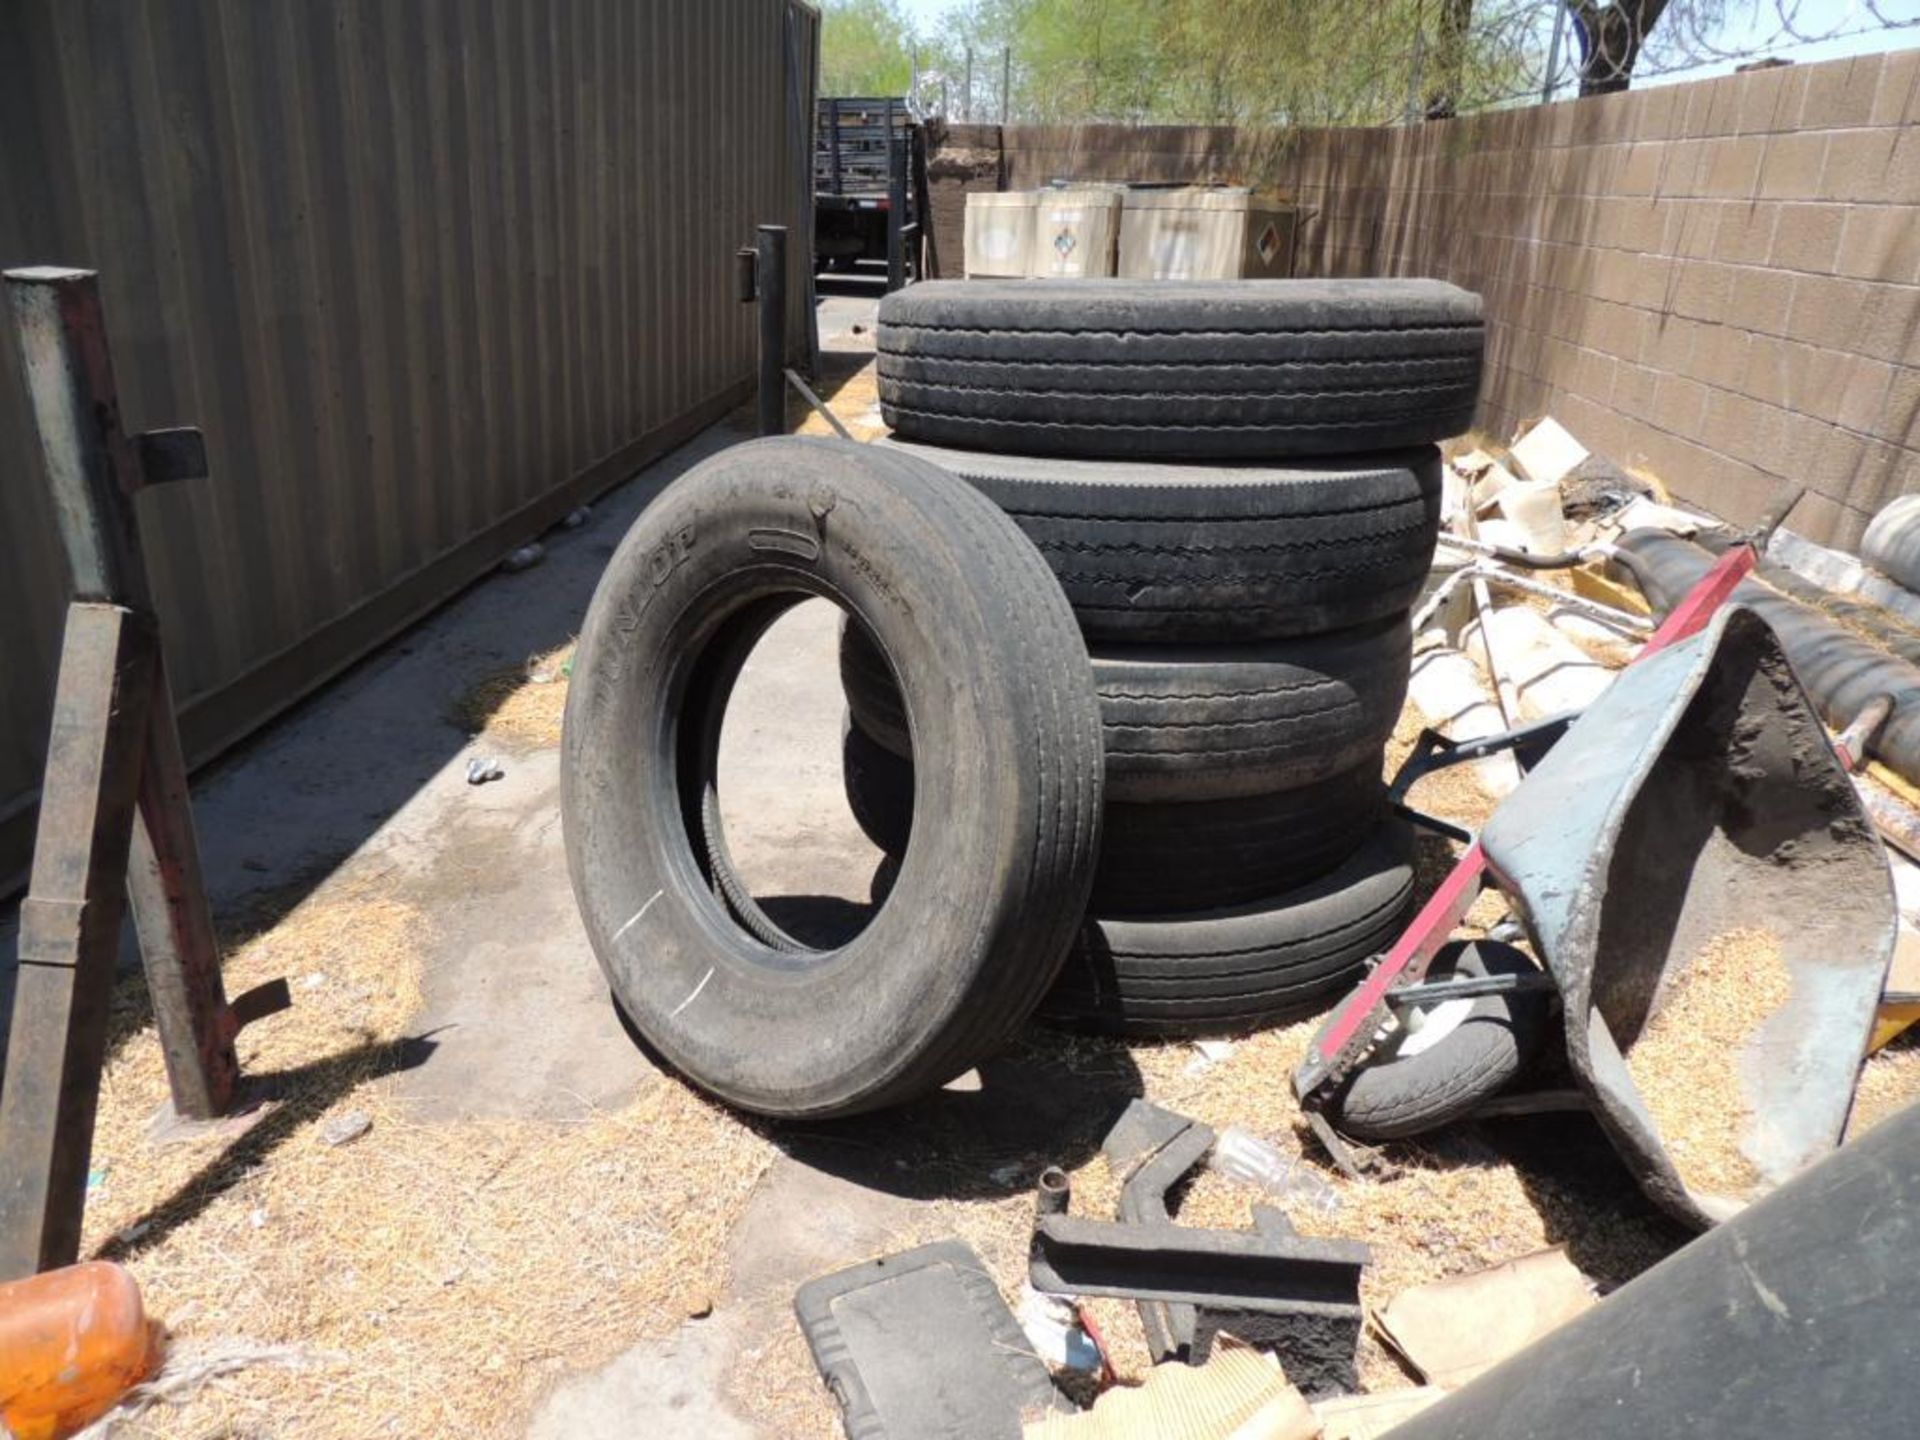 LOT: Misc. Rims and Tires, LOCATION: 2435 S. 6th Ave., Phoenix, AZ 85003 - Image 4 of 4